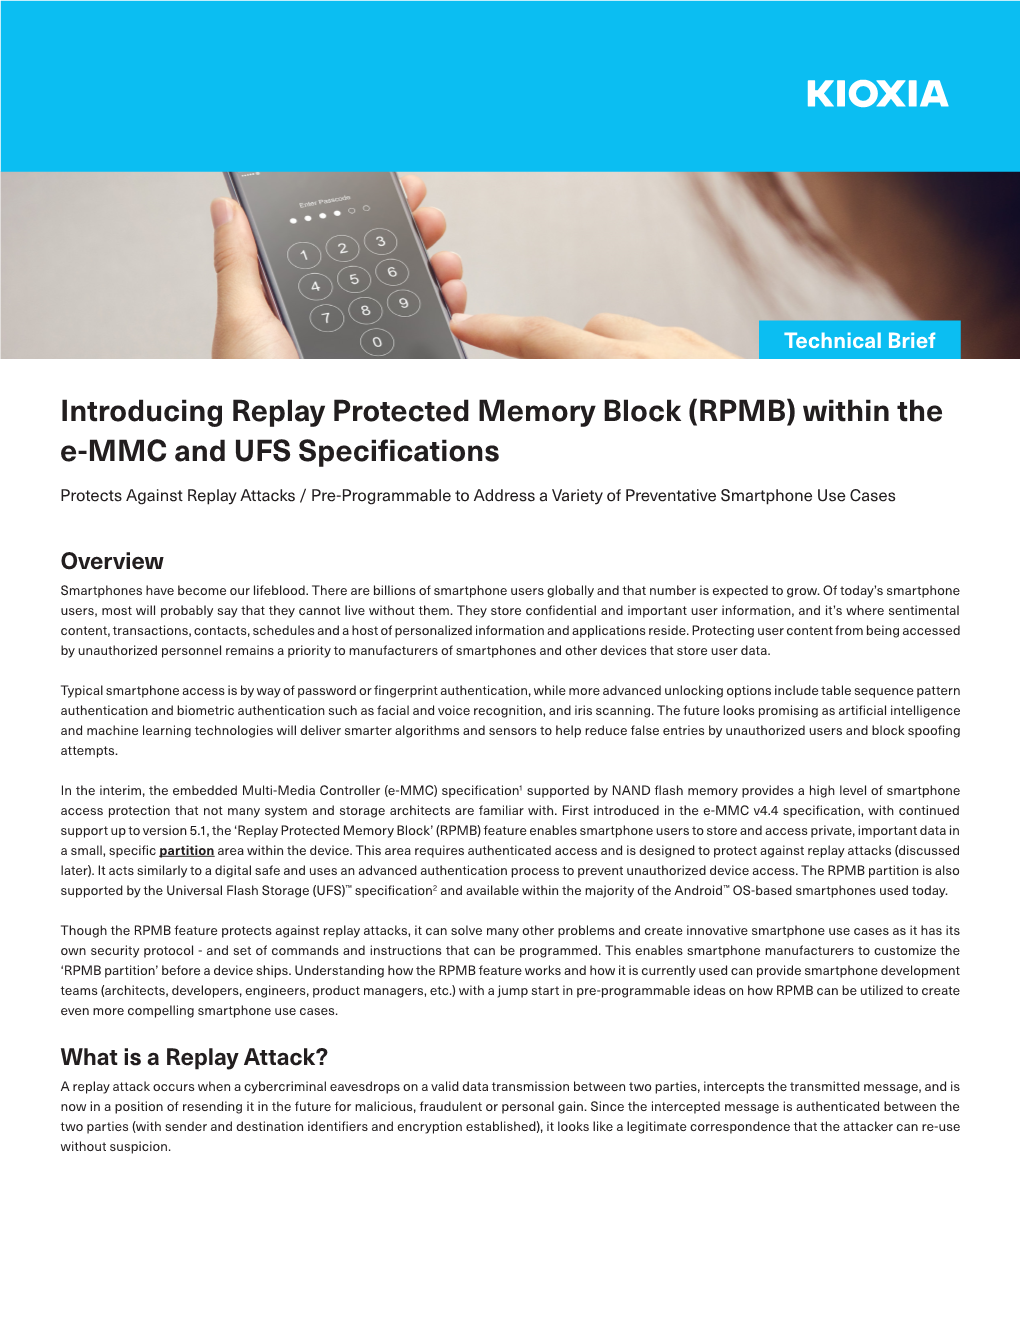 Introducing Replay Protected Memory Block (RPMB) Within the E-MMC and UFS Specifications